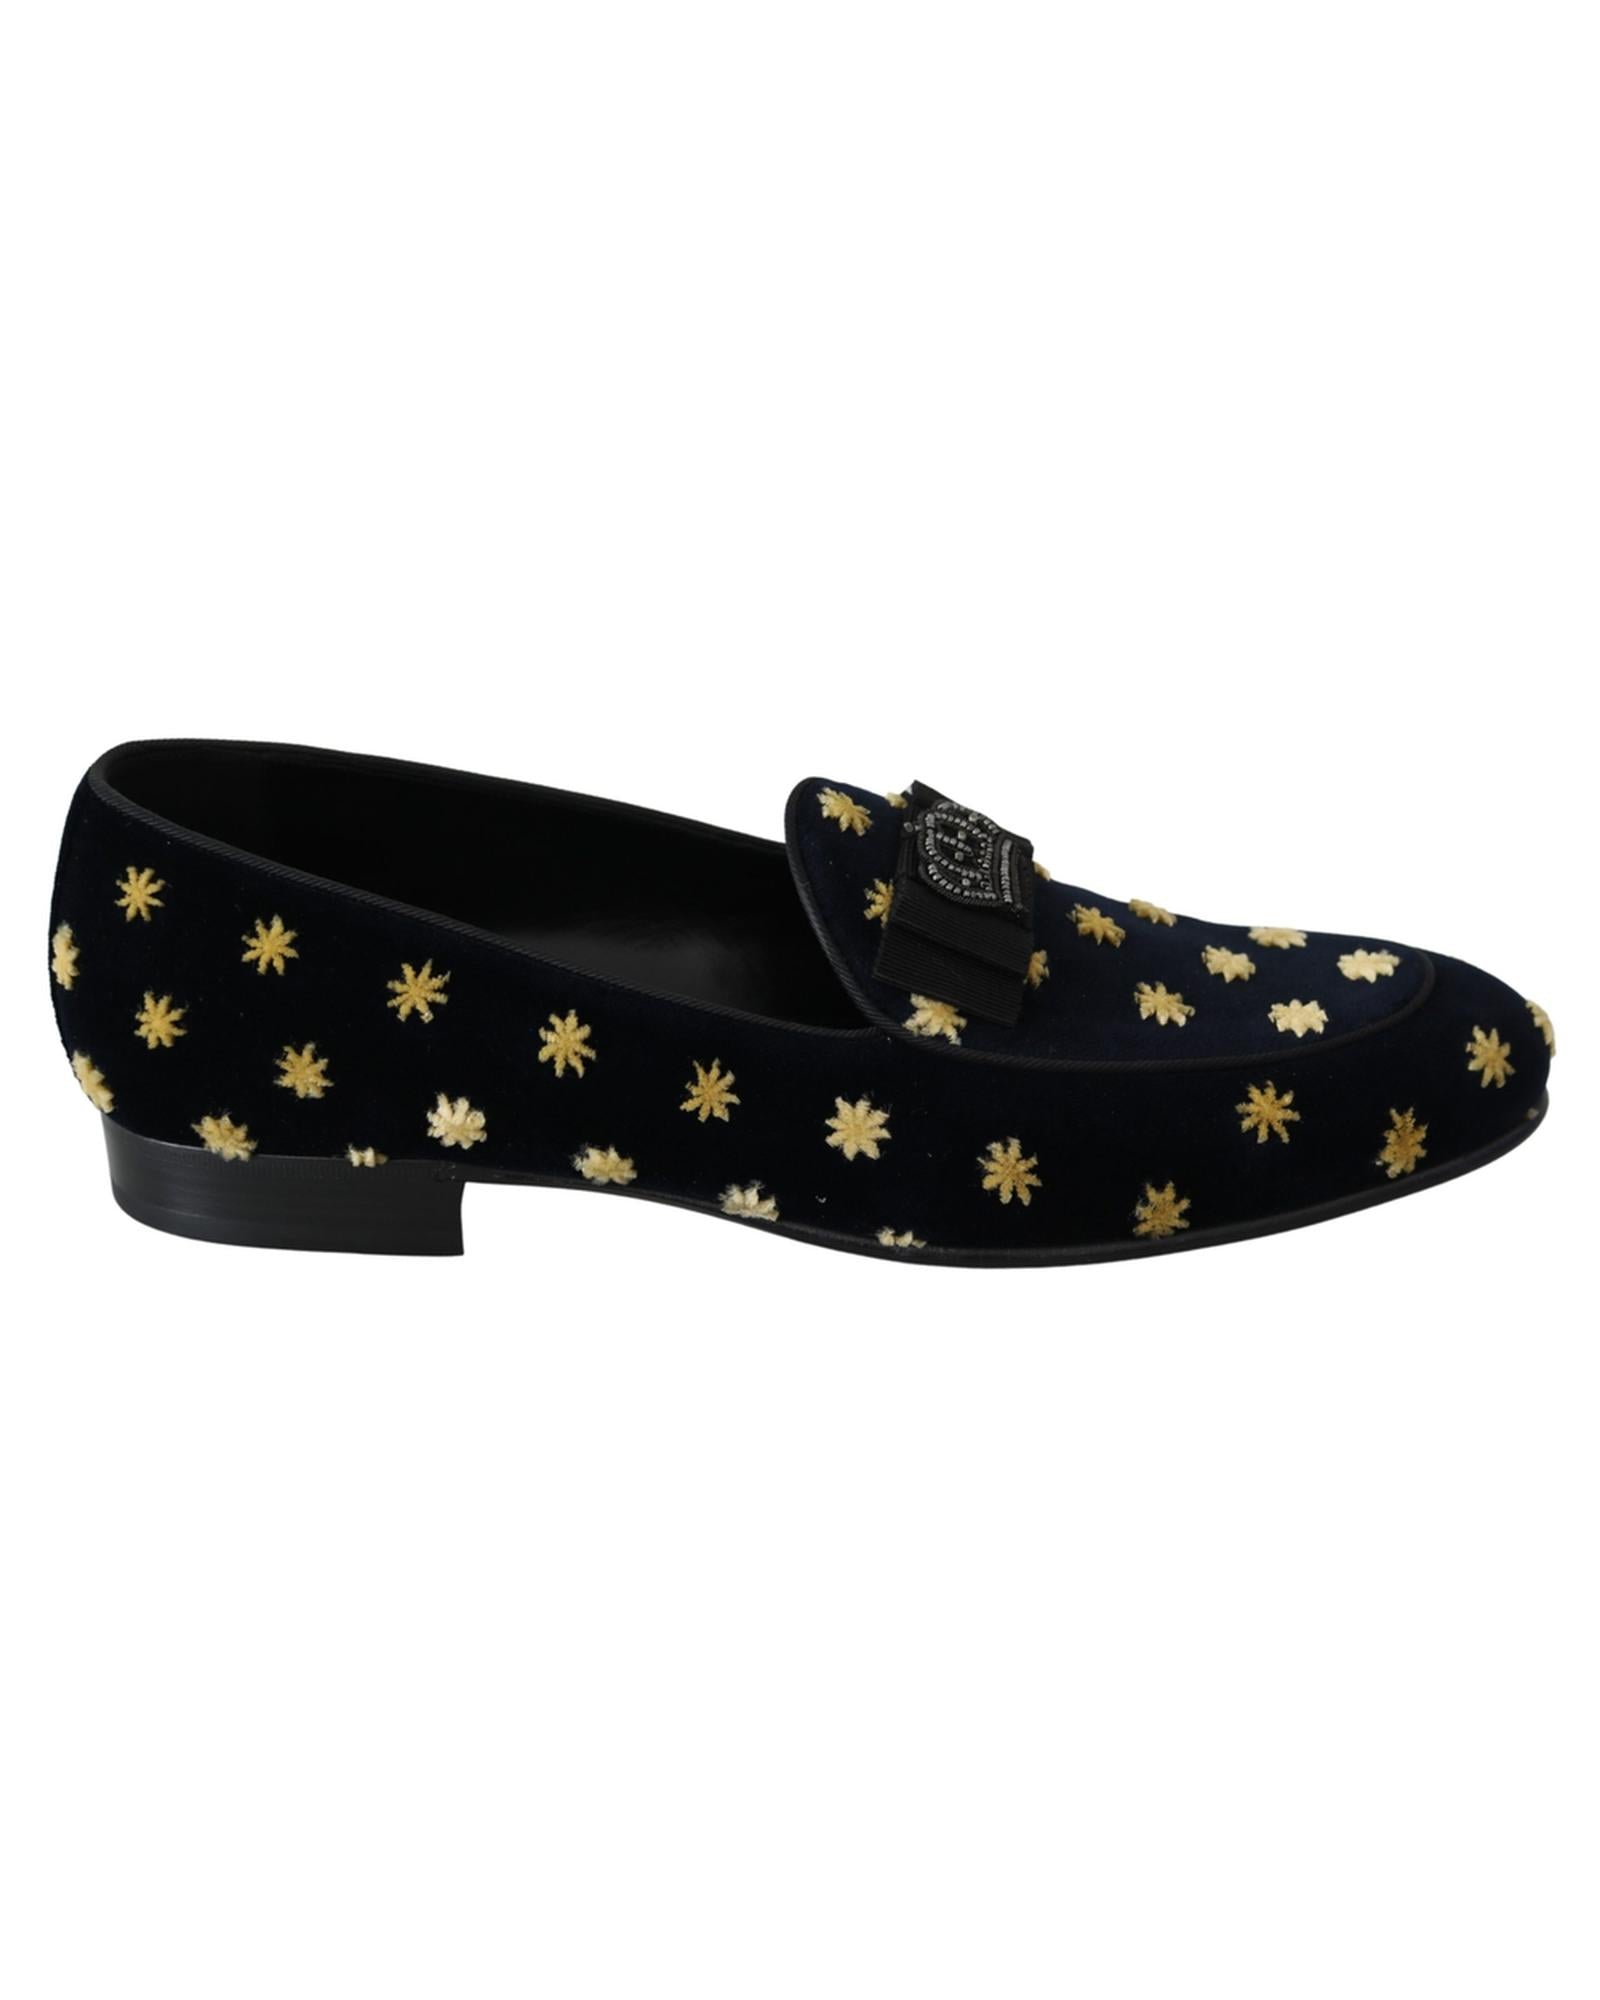 Velvet Loafers with Ricamo Embroidery and Crown Embellishment 39 EU Men